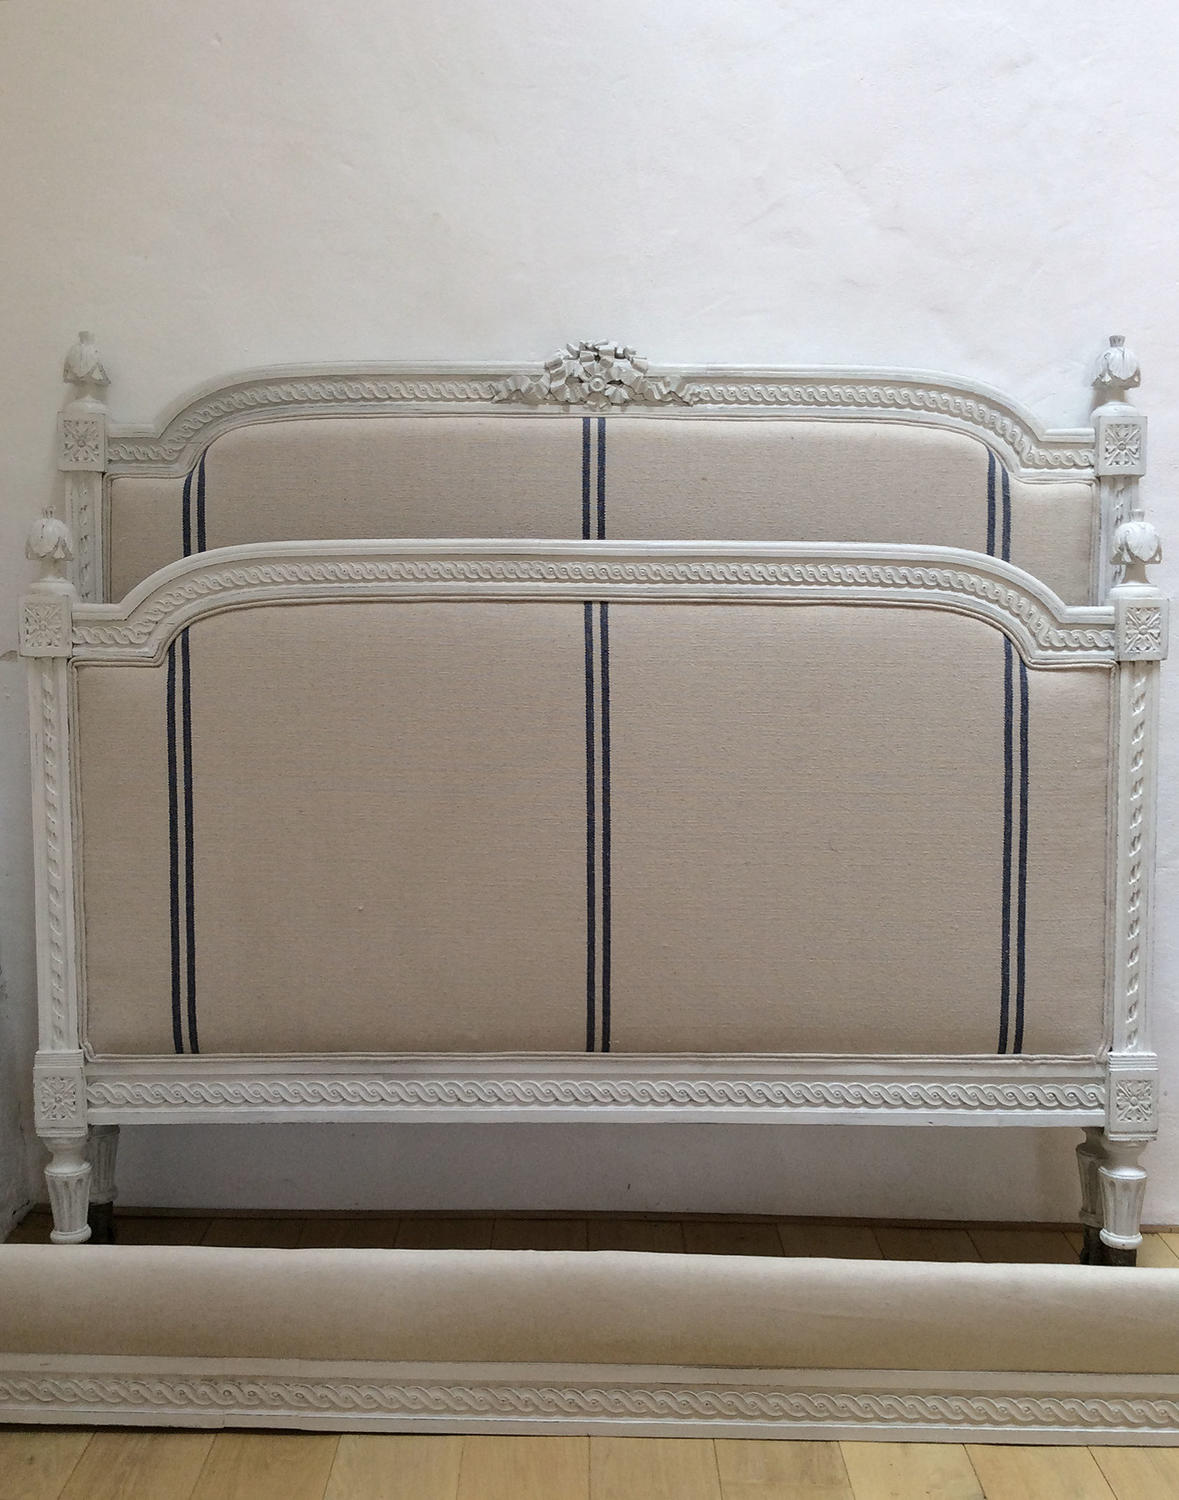 19th Century Louis XVI style double upholstered Bedstead